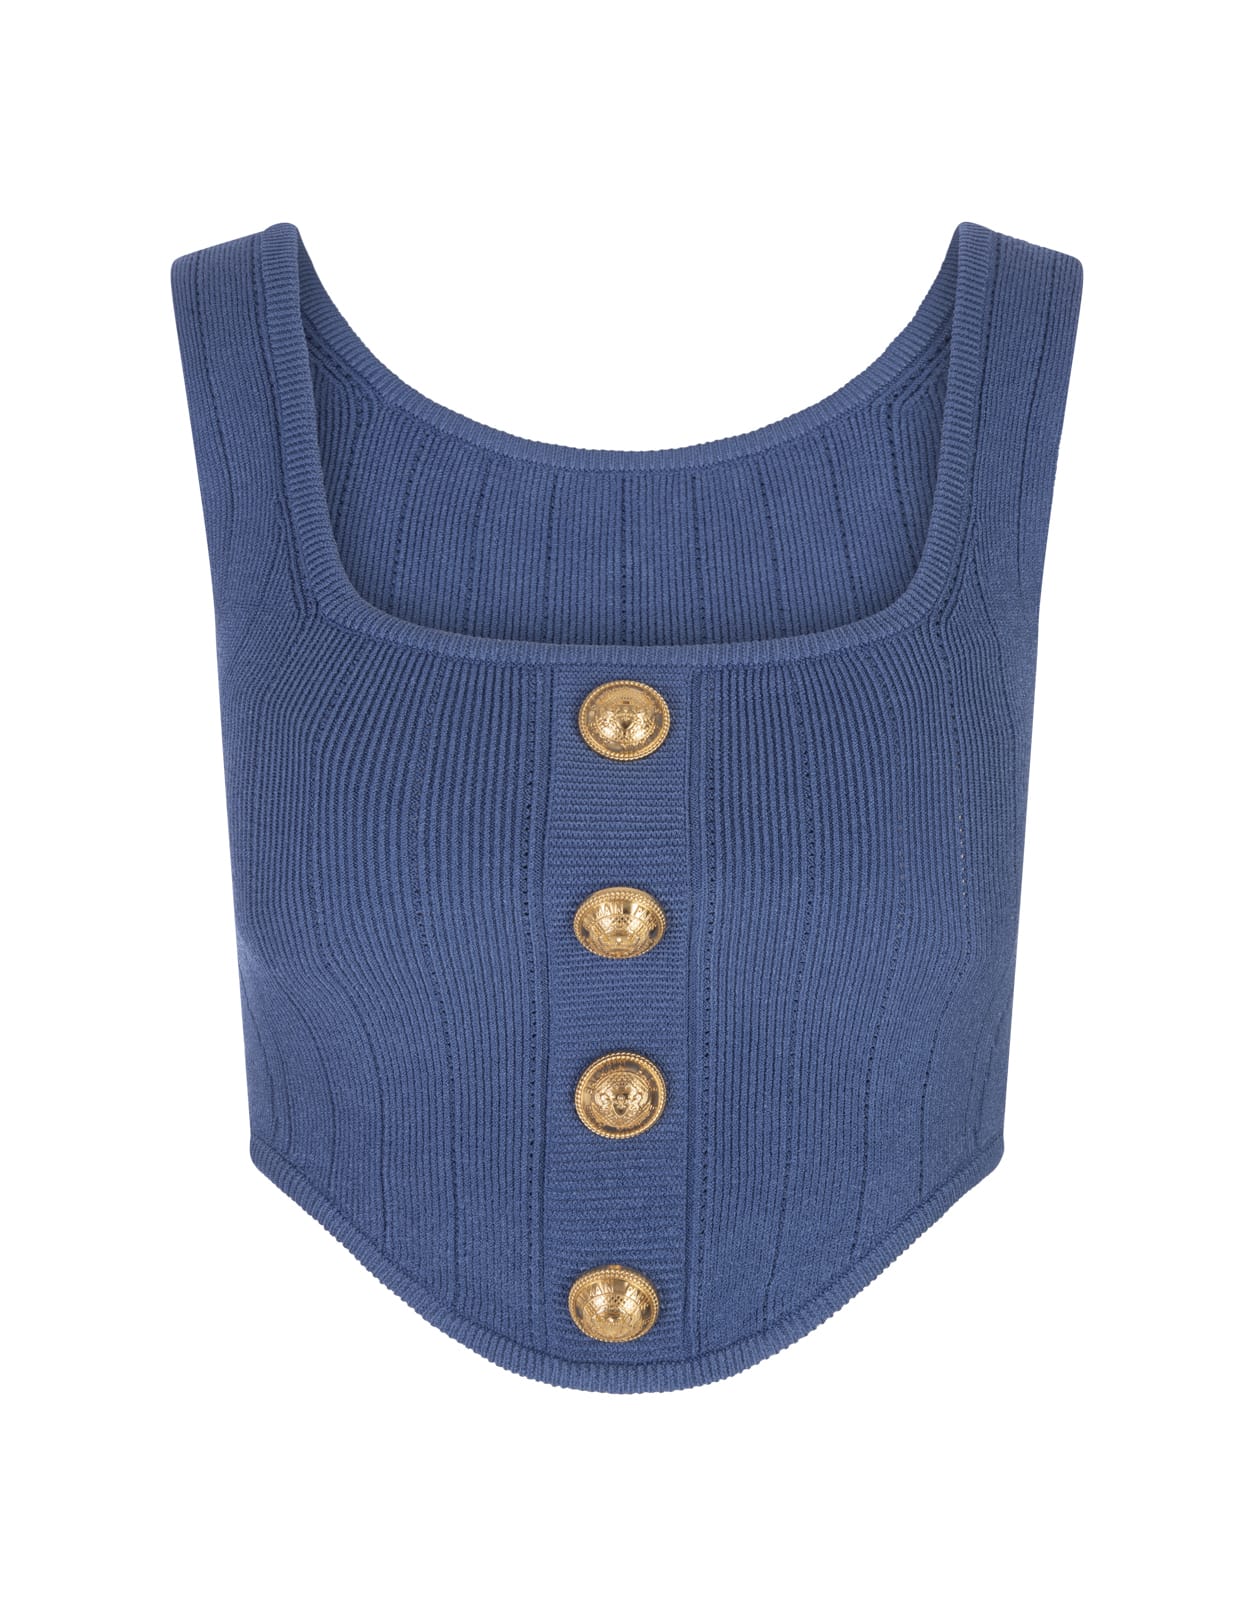 BALMAIN BLUE KNITTED CORSET TOP WITH BUTTONS